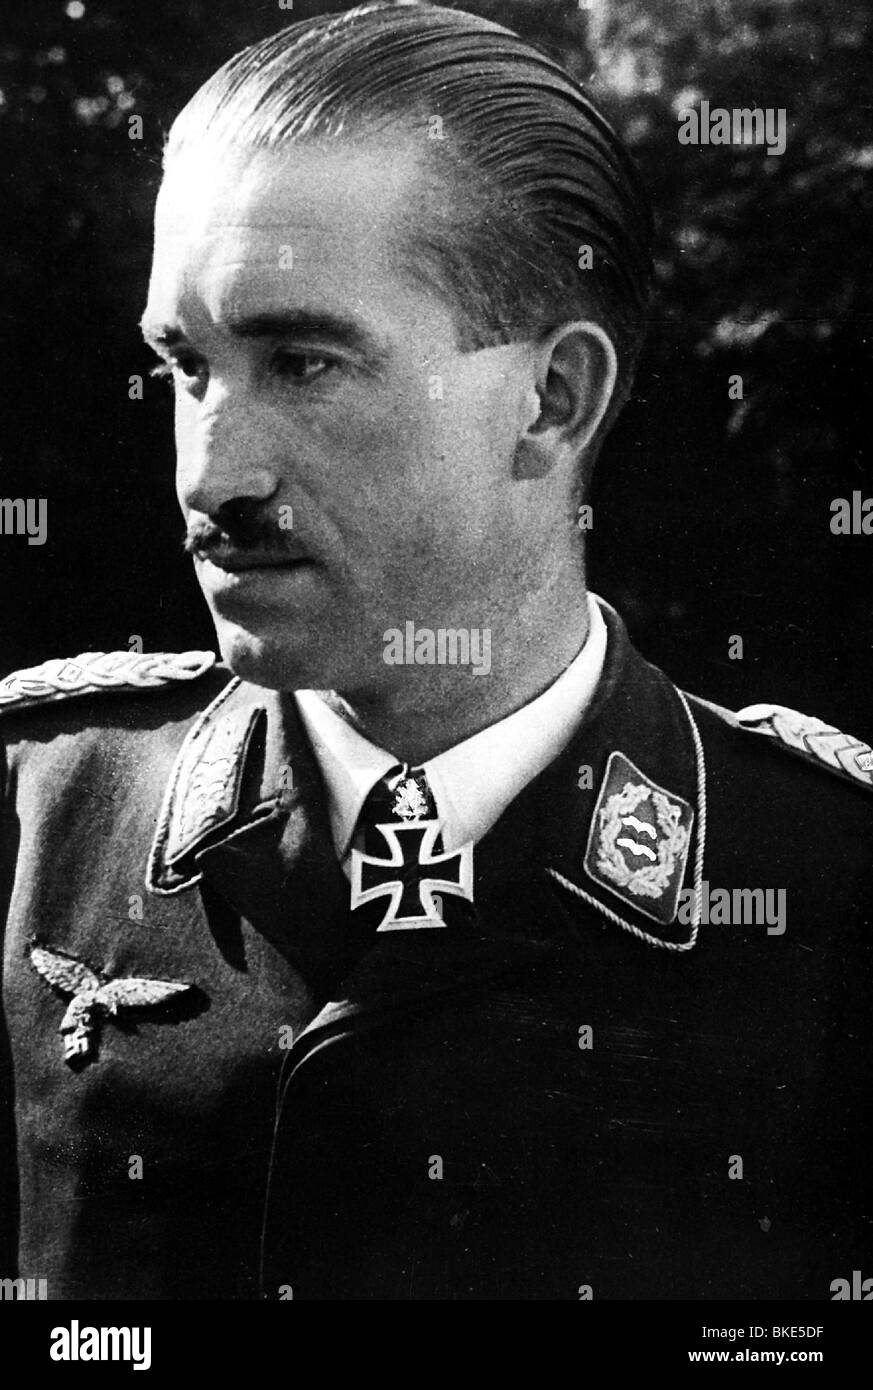 Galland, Adolf, 19.3.1912 - 9.2.1996, German fighter pilot, portrait, as major after receiving the Knight's Cross with Oak Leaves, 25.9.1940, Stock Photo